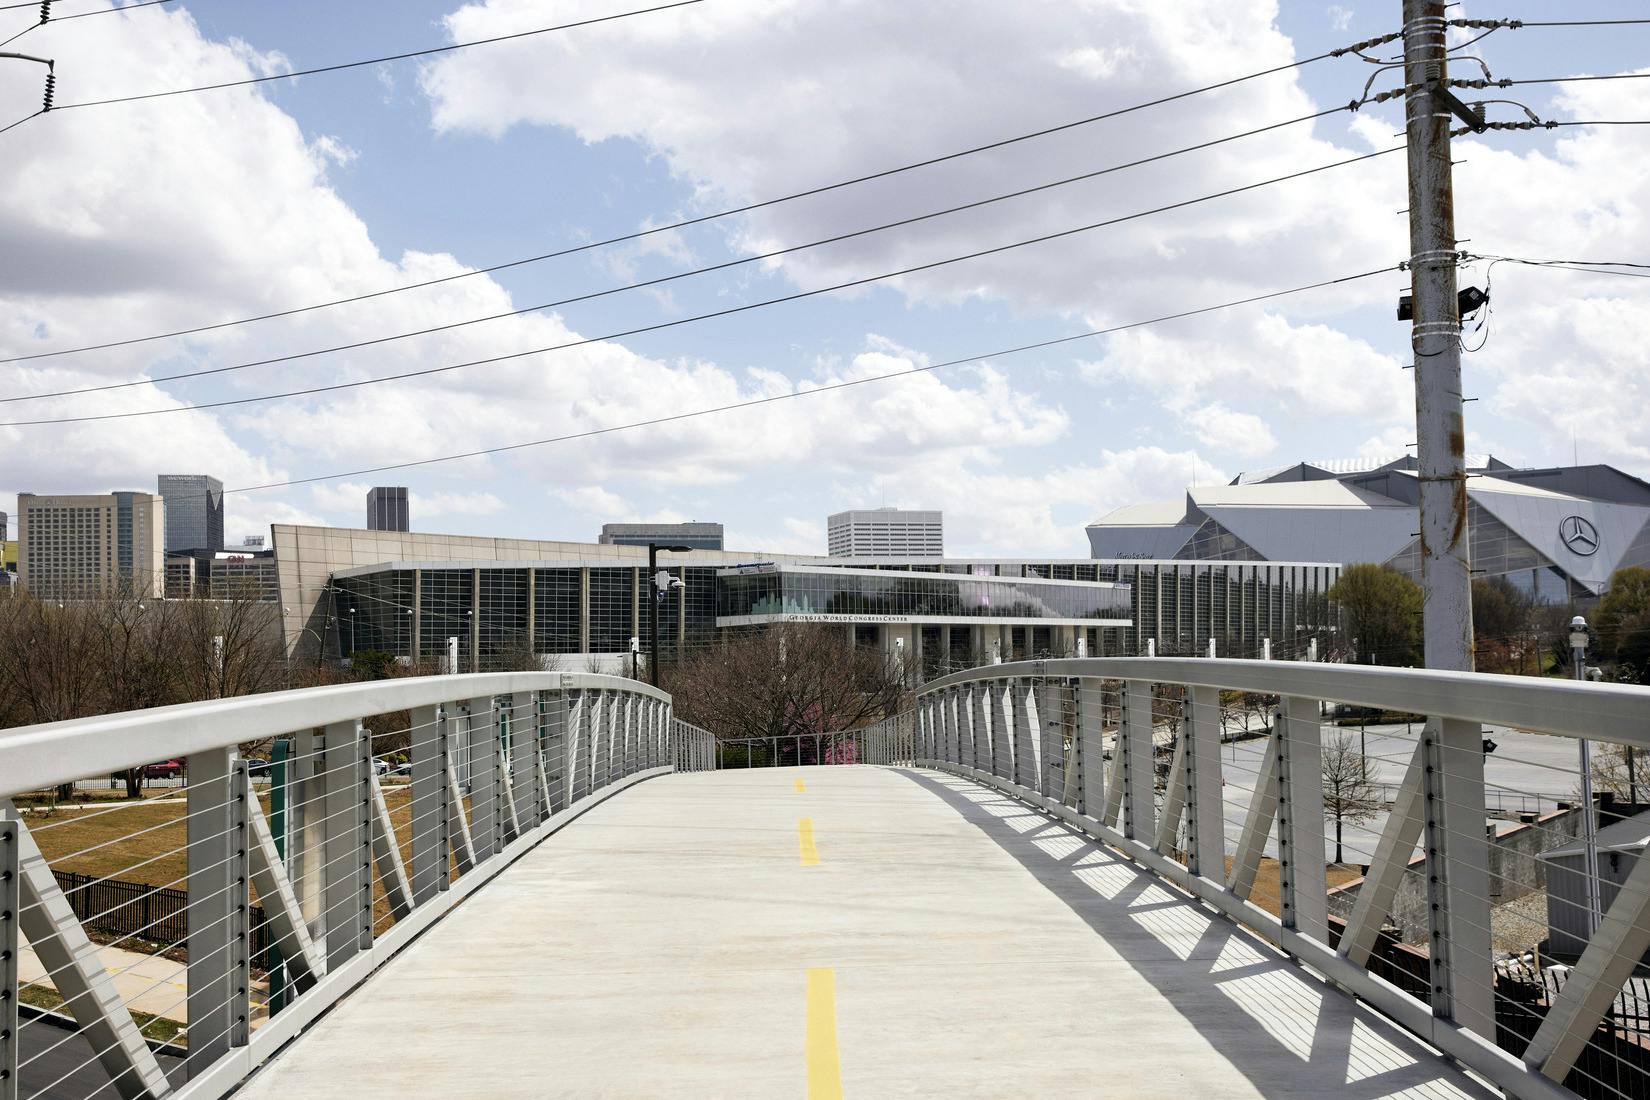 A bridge has a paved pathway over it and leads to the city.